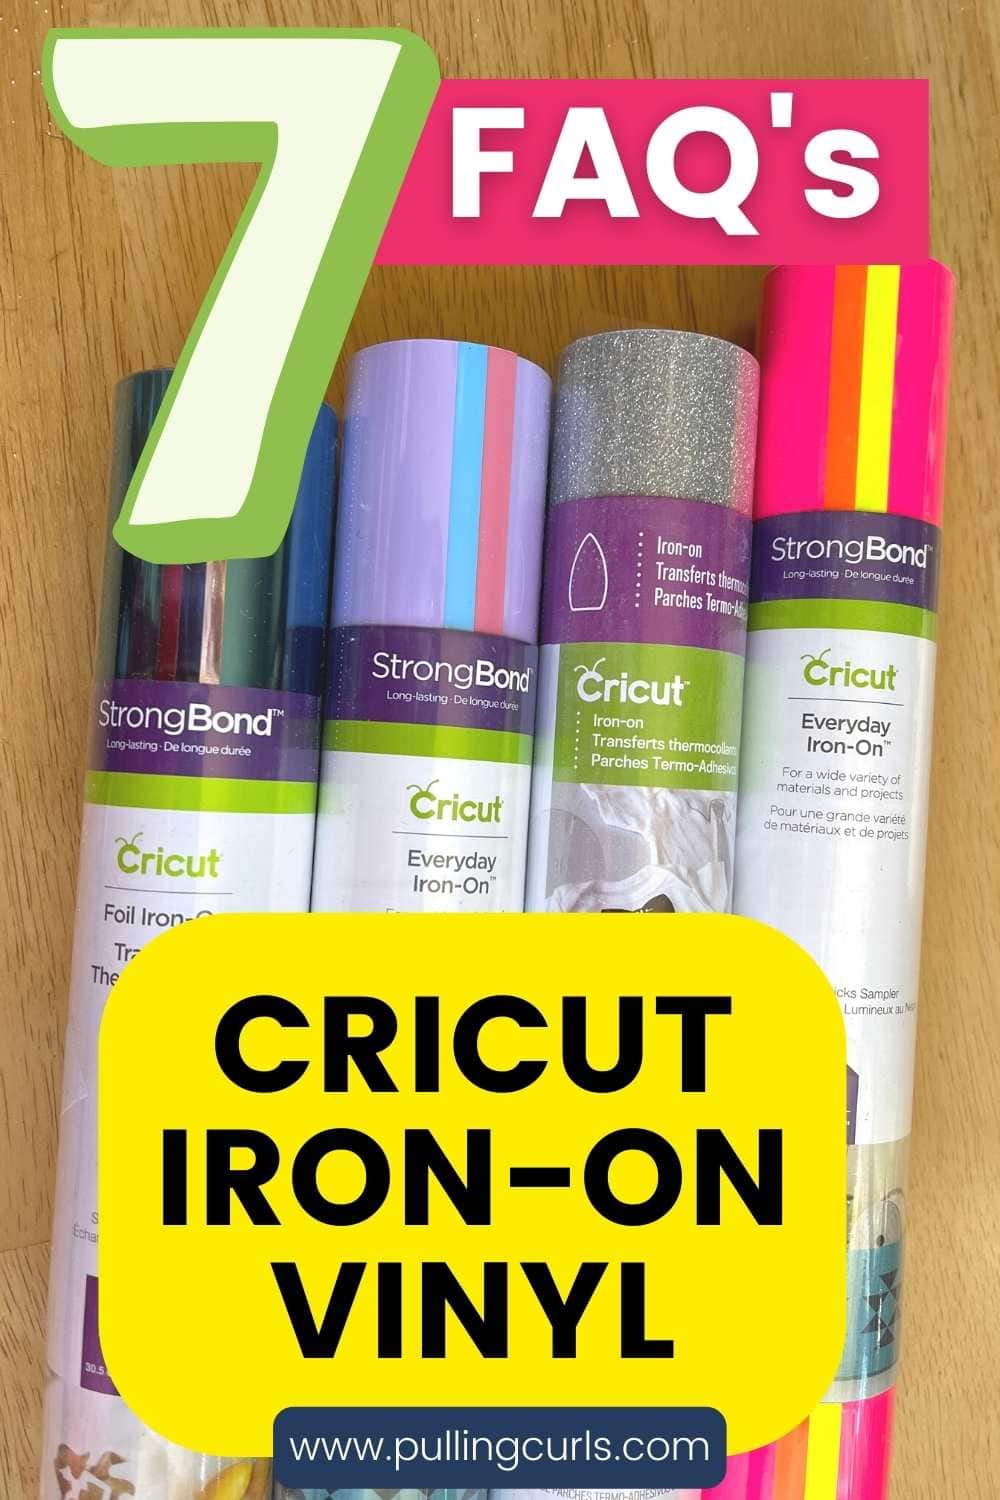 Top 8 Frequently Asked Questions about Cricut Everyday Iron-On Vinyl